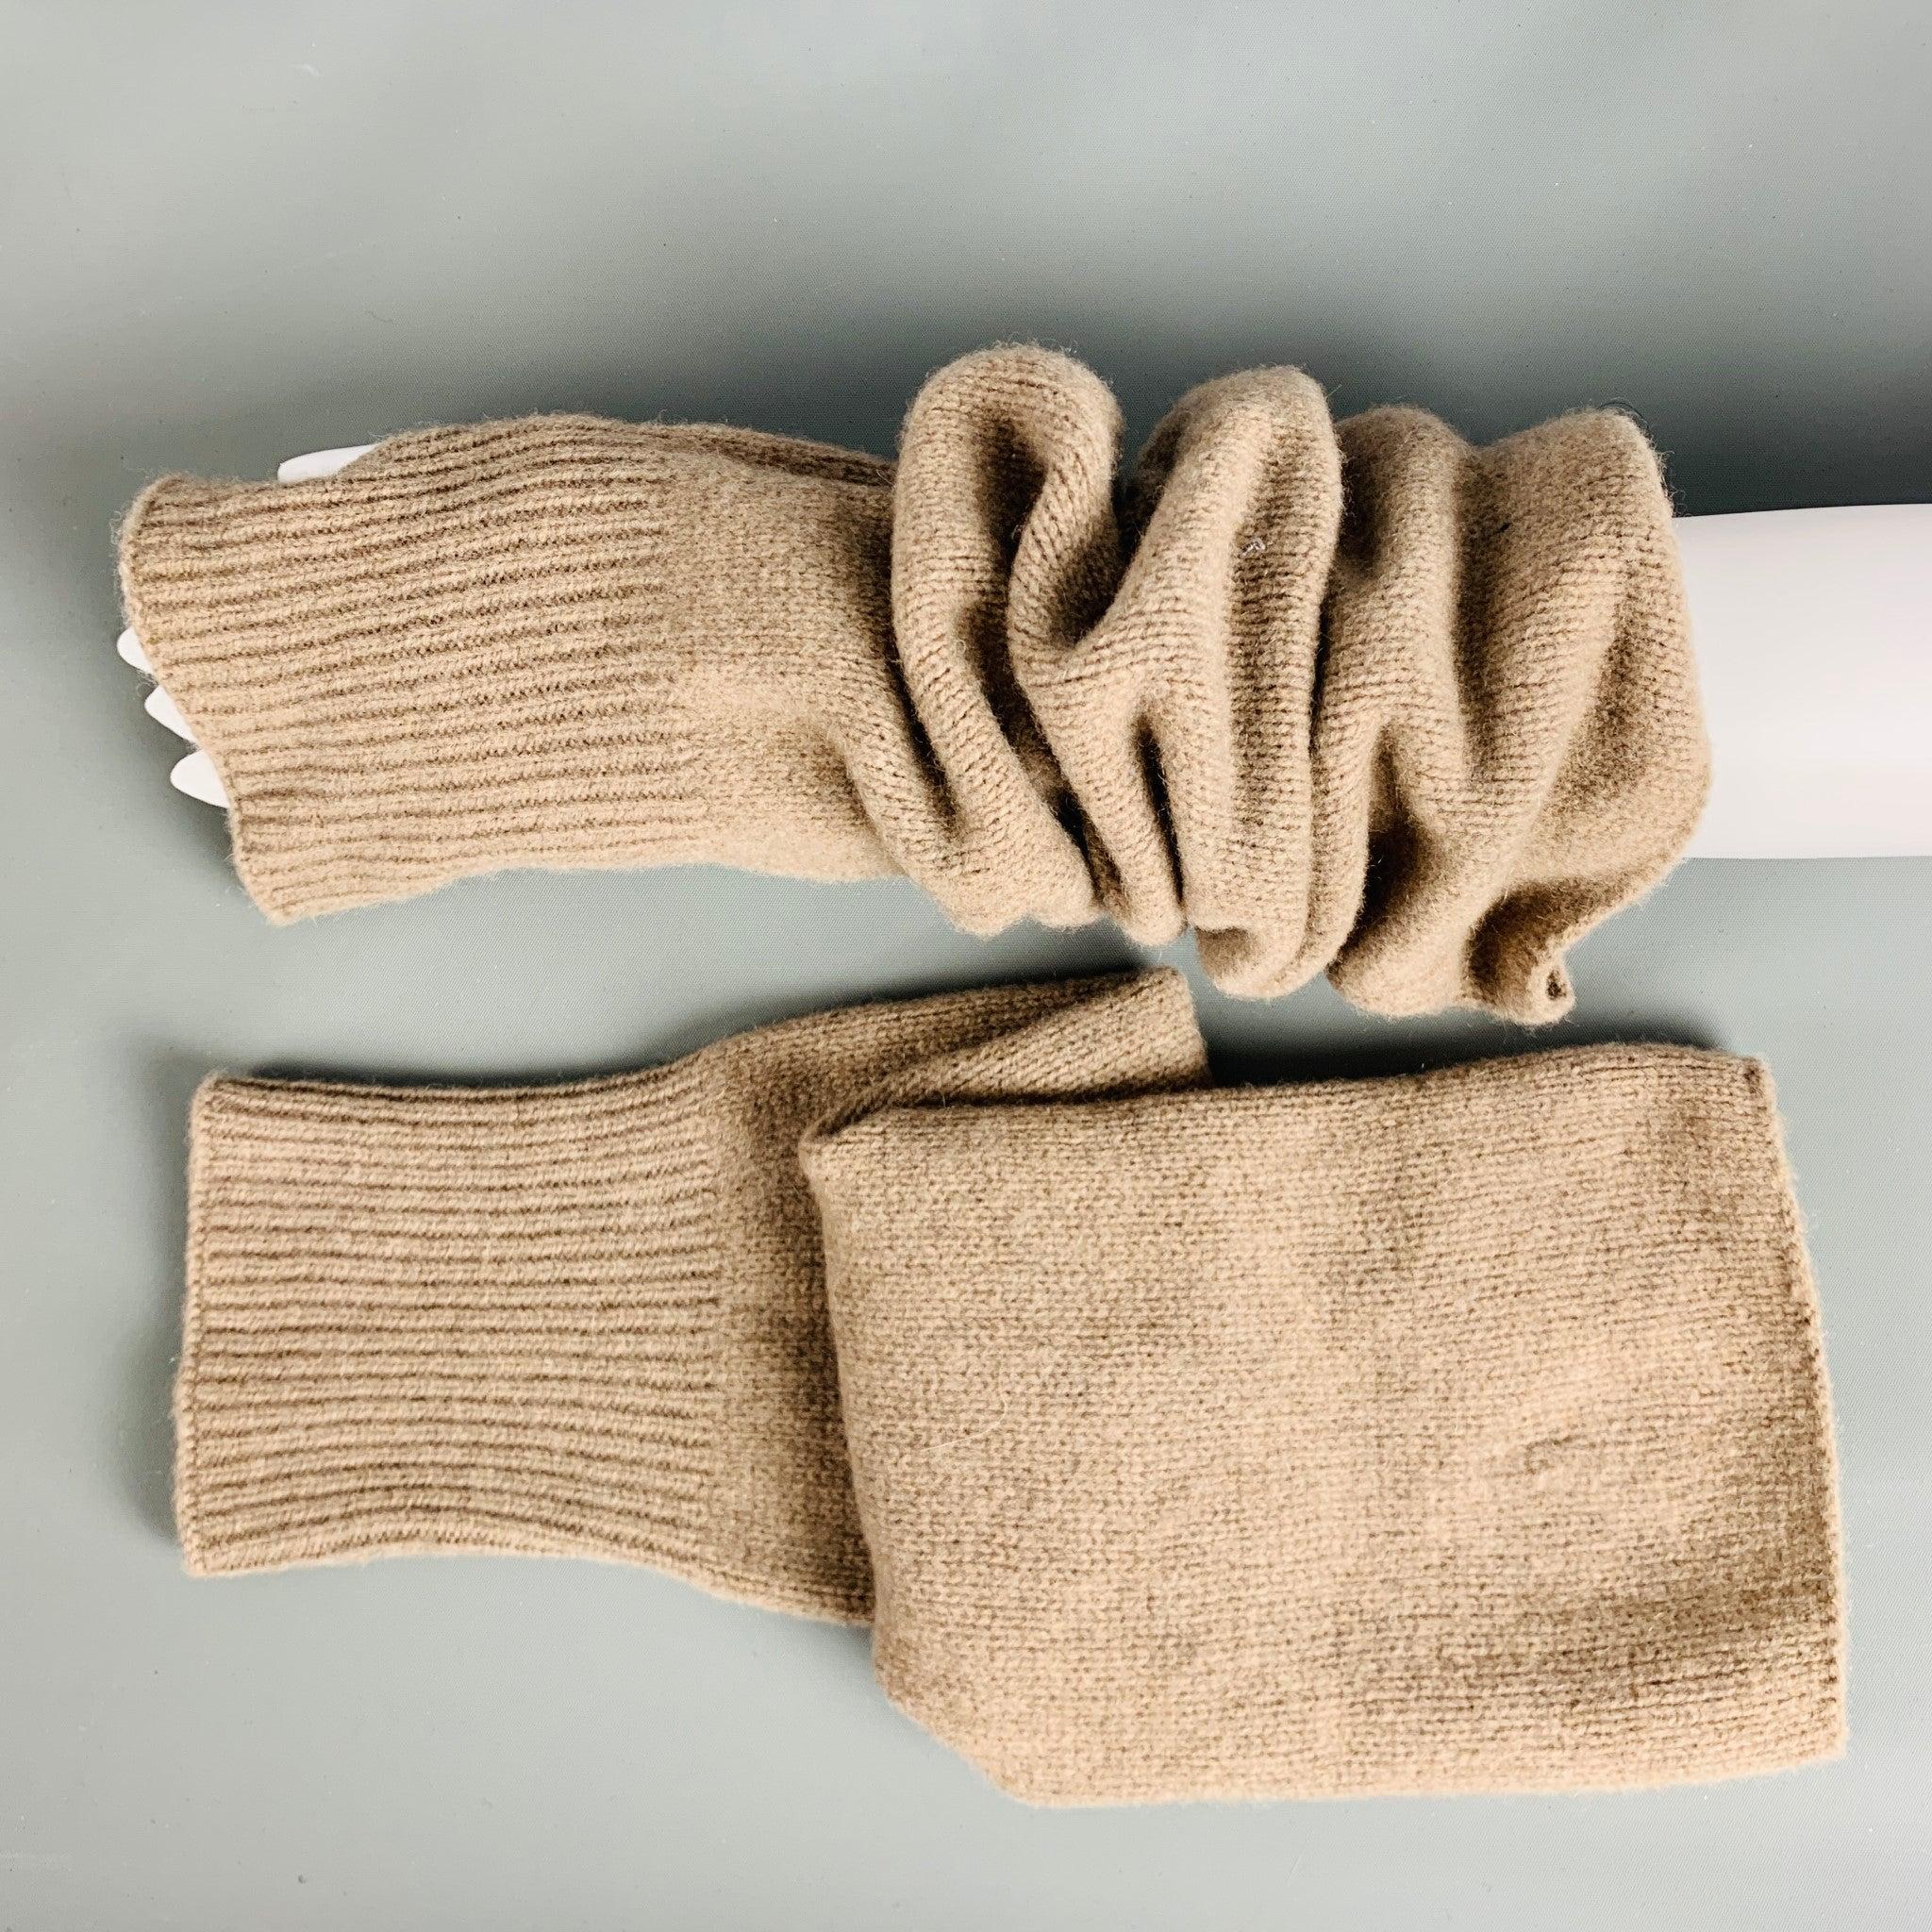 MARC JACOBS 2012 arm warmers comes in a grey and taupe ribbed knit cashmere and wool blend featuring a fingerless style. Made in Italy. Very Good Pre-Owned Condition. 

Marked:   one size 

Measurements: 
  Width: 5 inches Length: 19.5 inches  
  
 